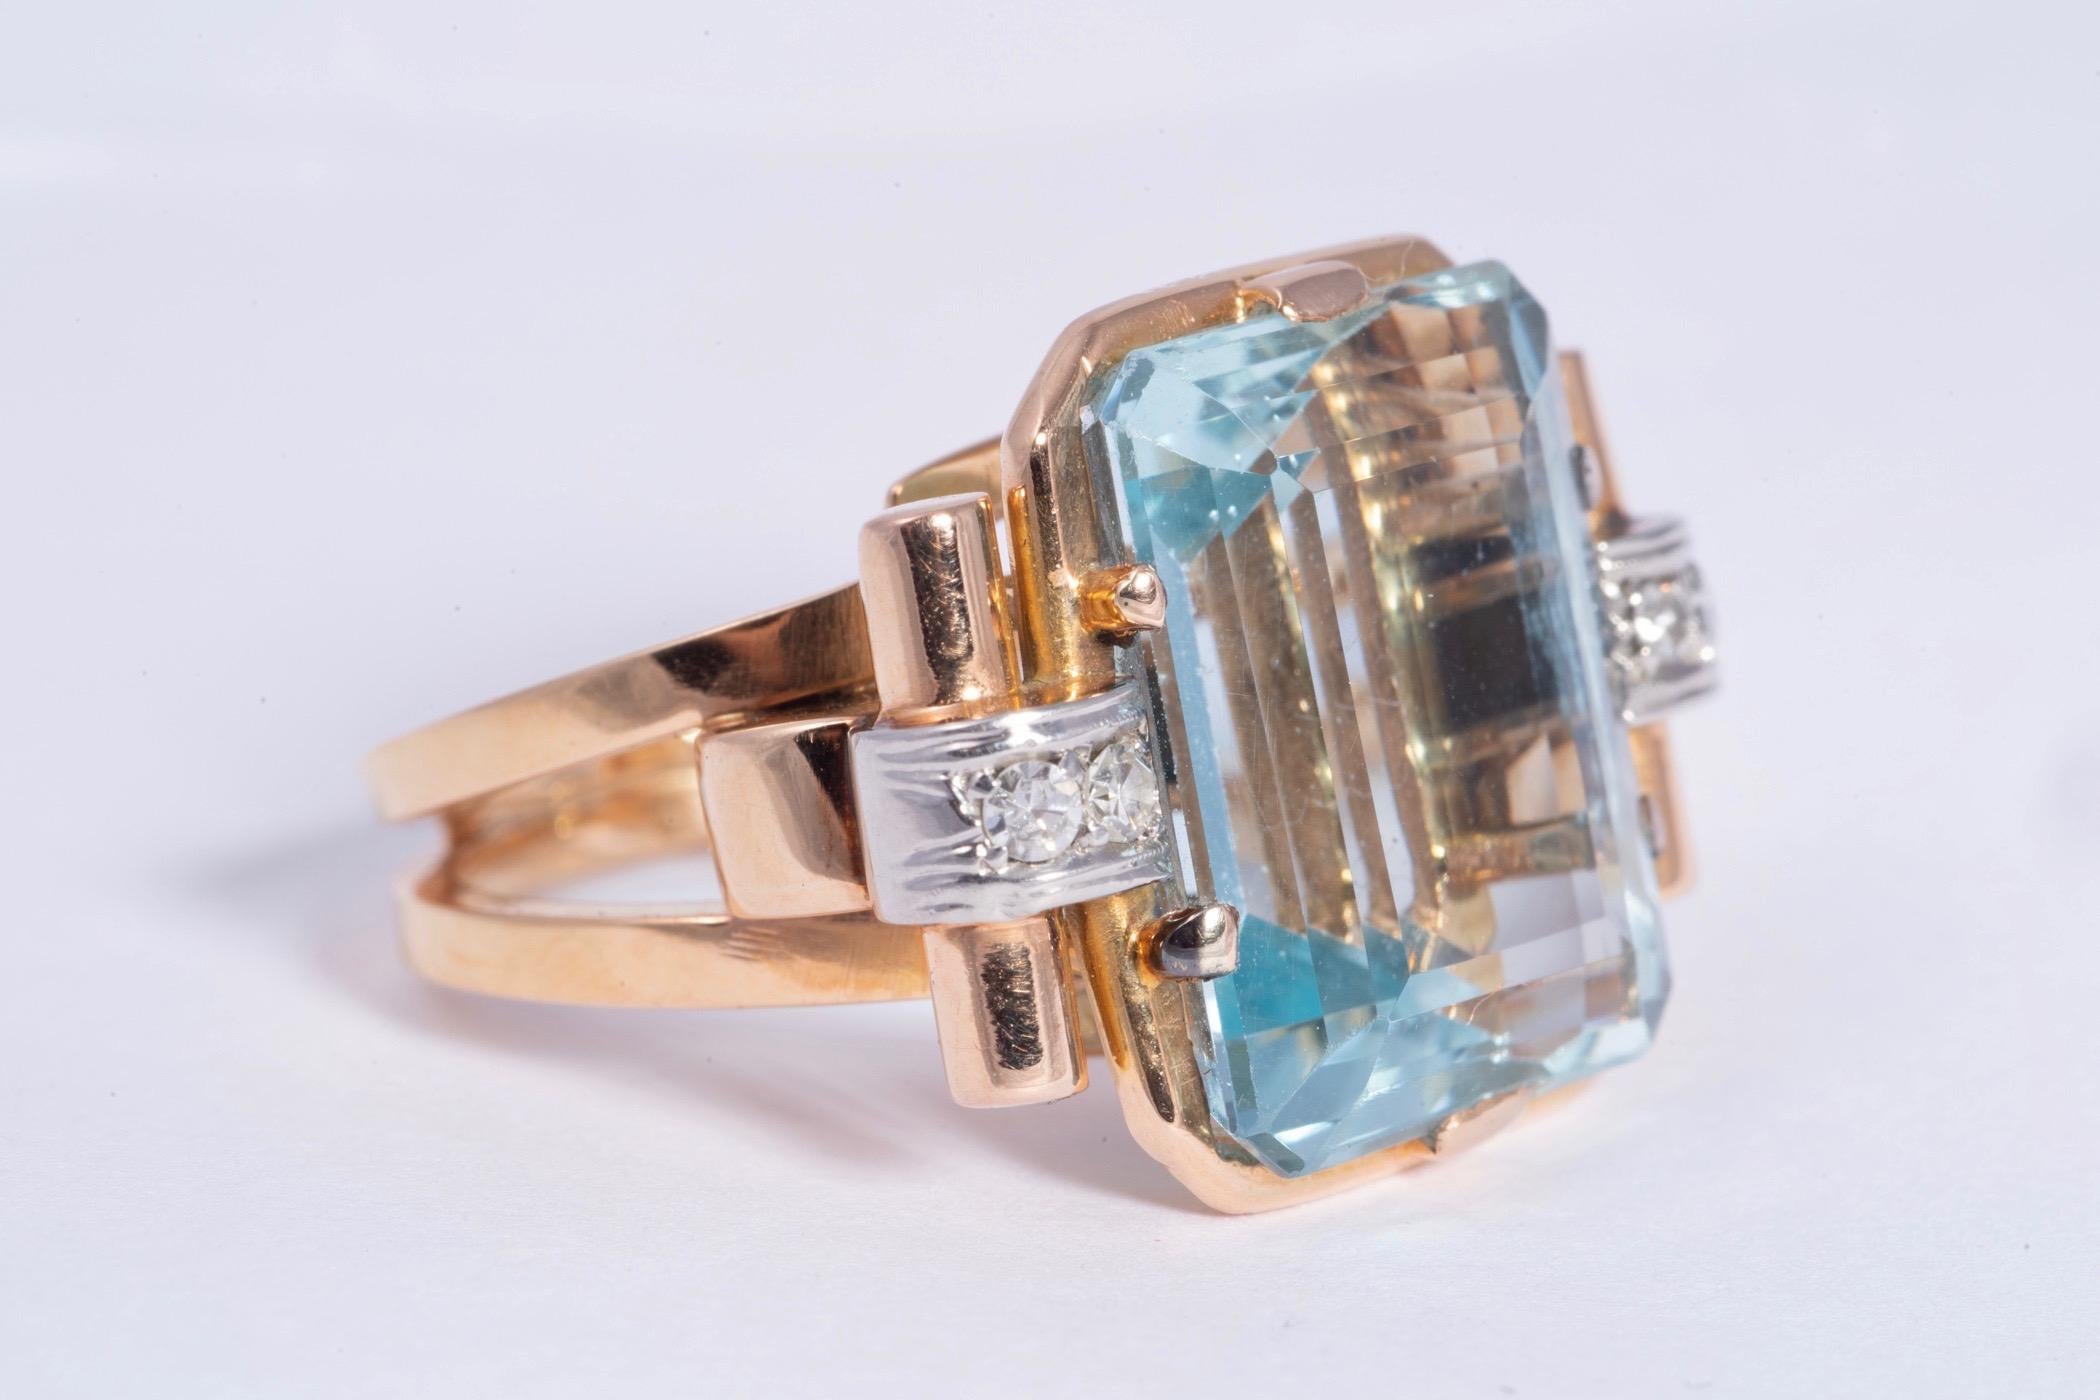 Magnificent aquamarine and diamond period art deco ring. The center aquamarine measures 16.50x13.20x8.10mm and weighs approximately 12.00cts. The stone has excellent clarity and pale blue color There are two single cut diamonds on either side of the